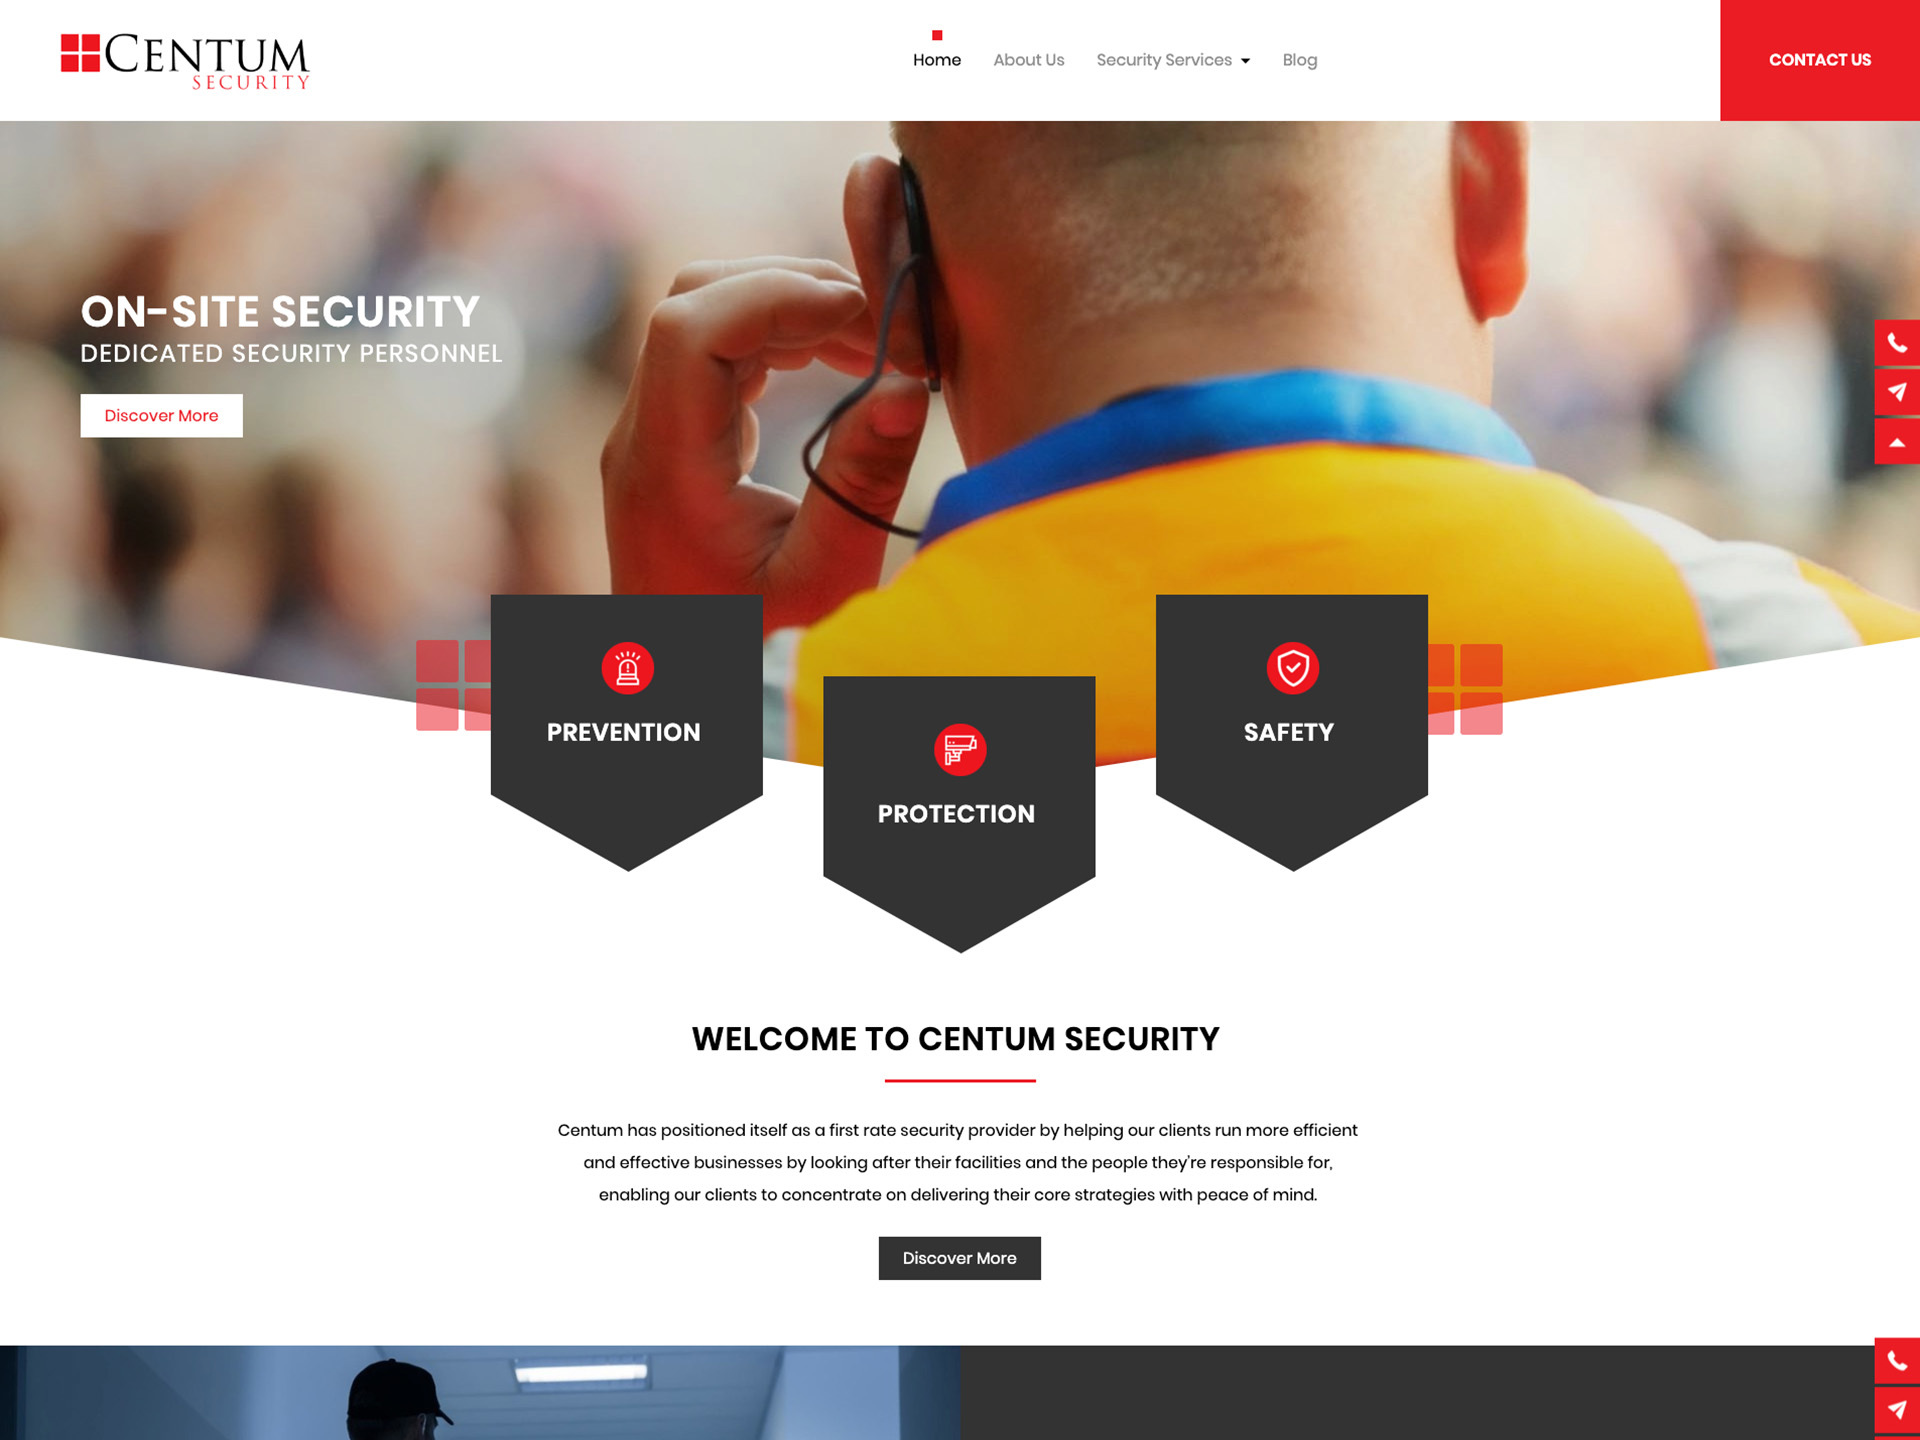 A website design for an on-site security company